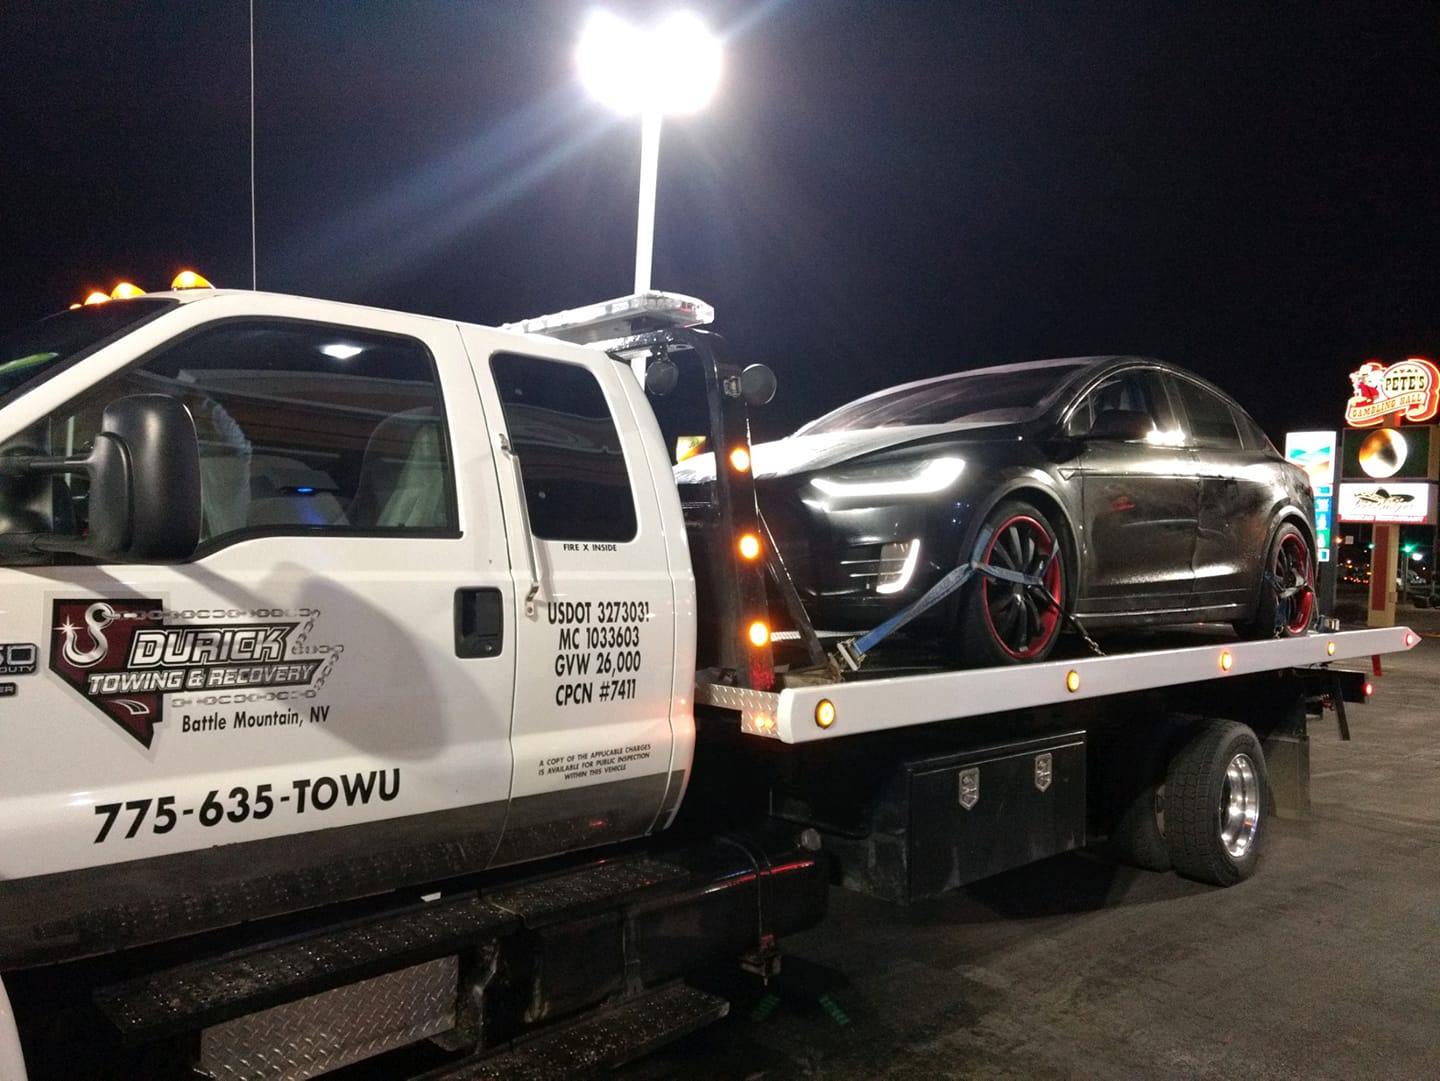 Durick Towing & Recovery 455 Round Mountain Drive Ste. A, Battle Mountain Nevada 89820